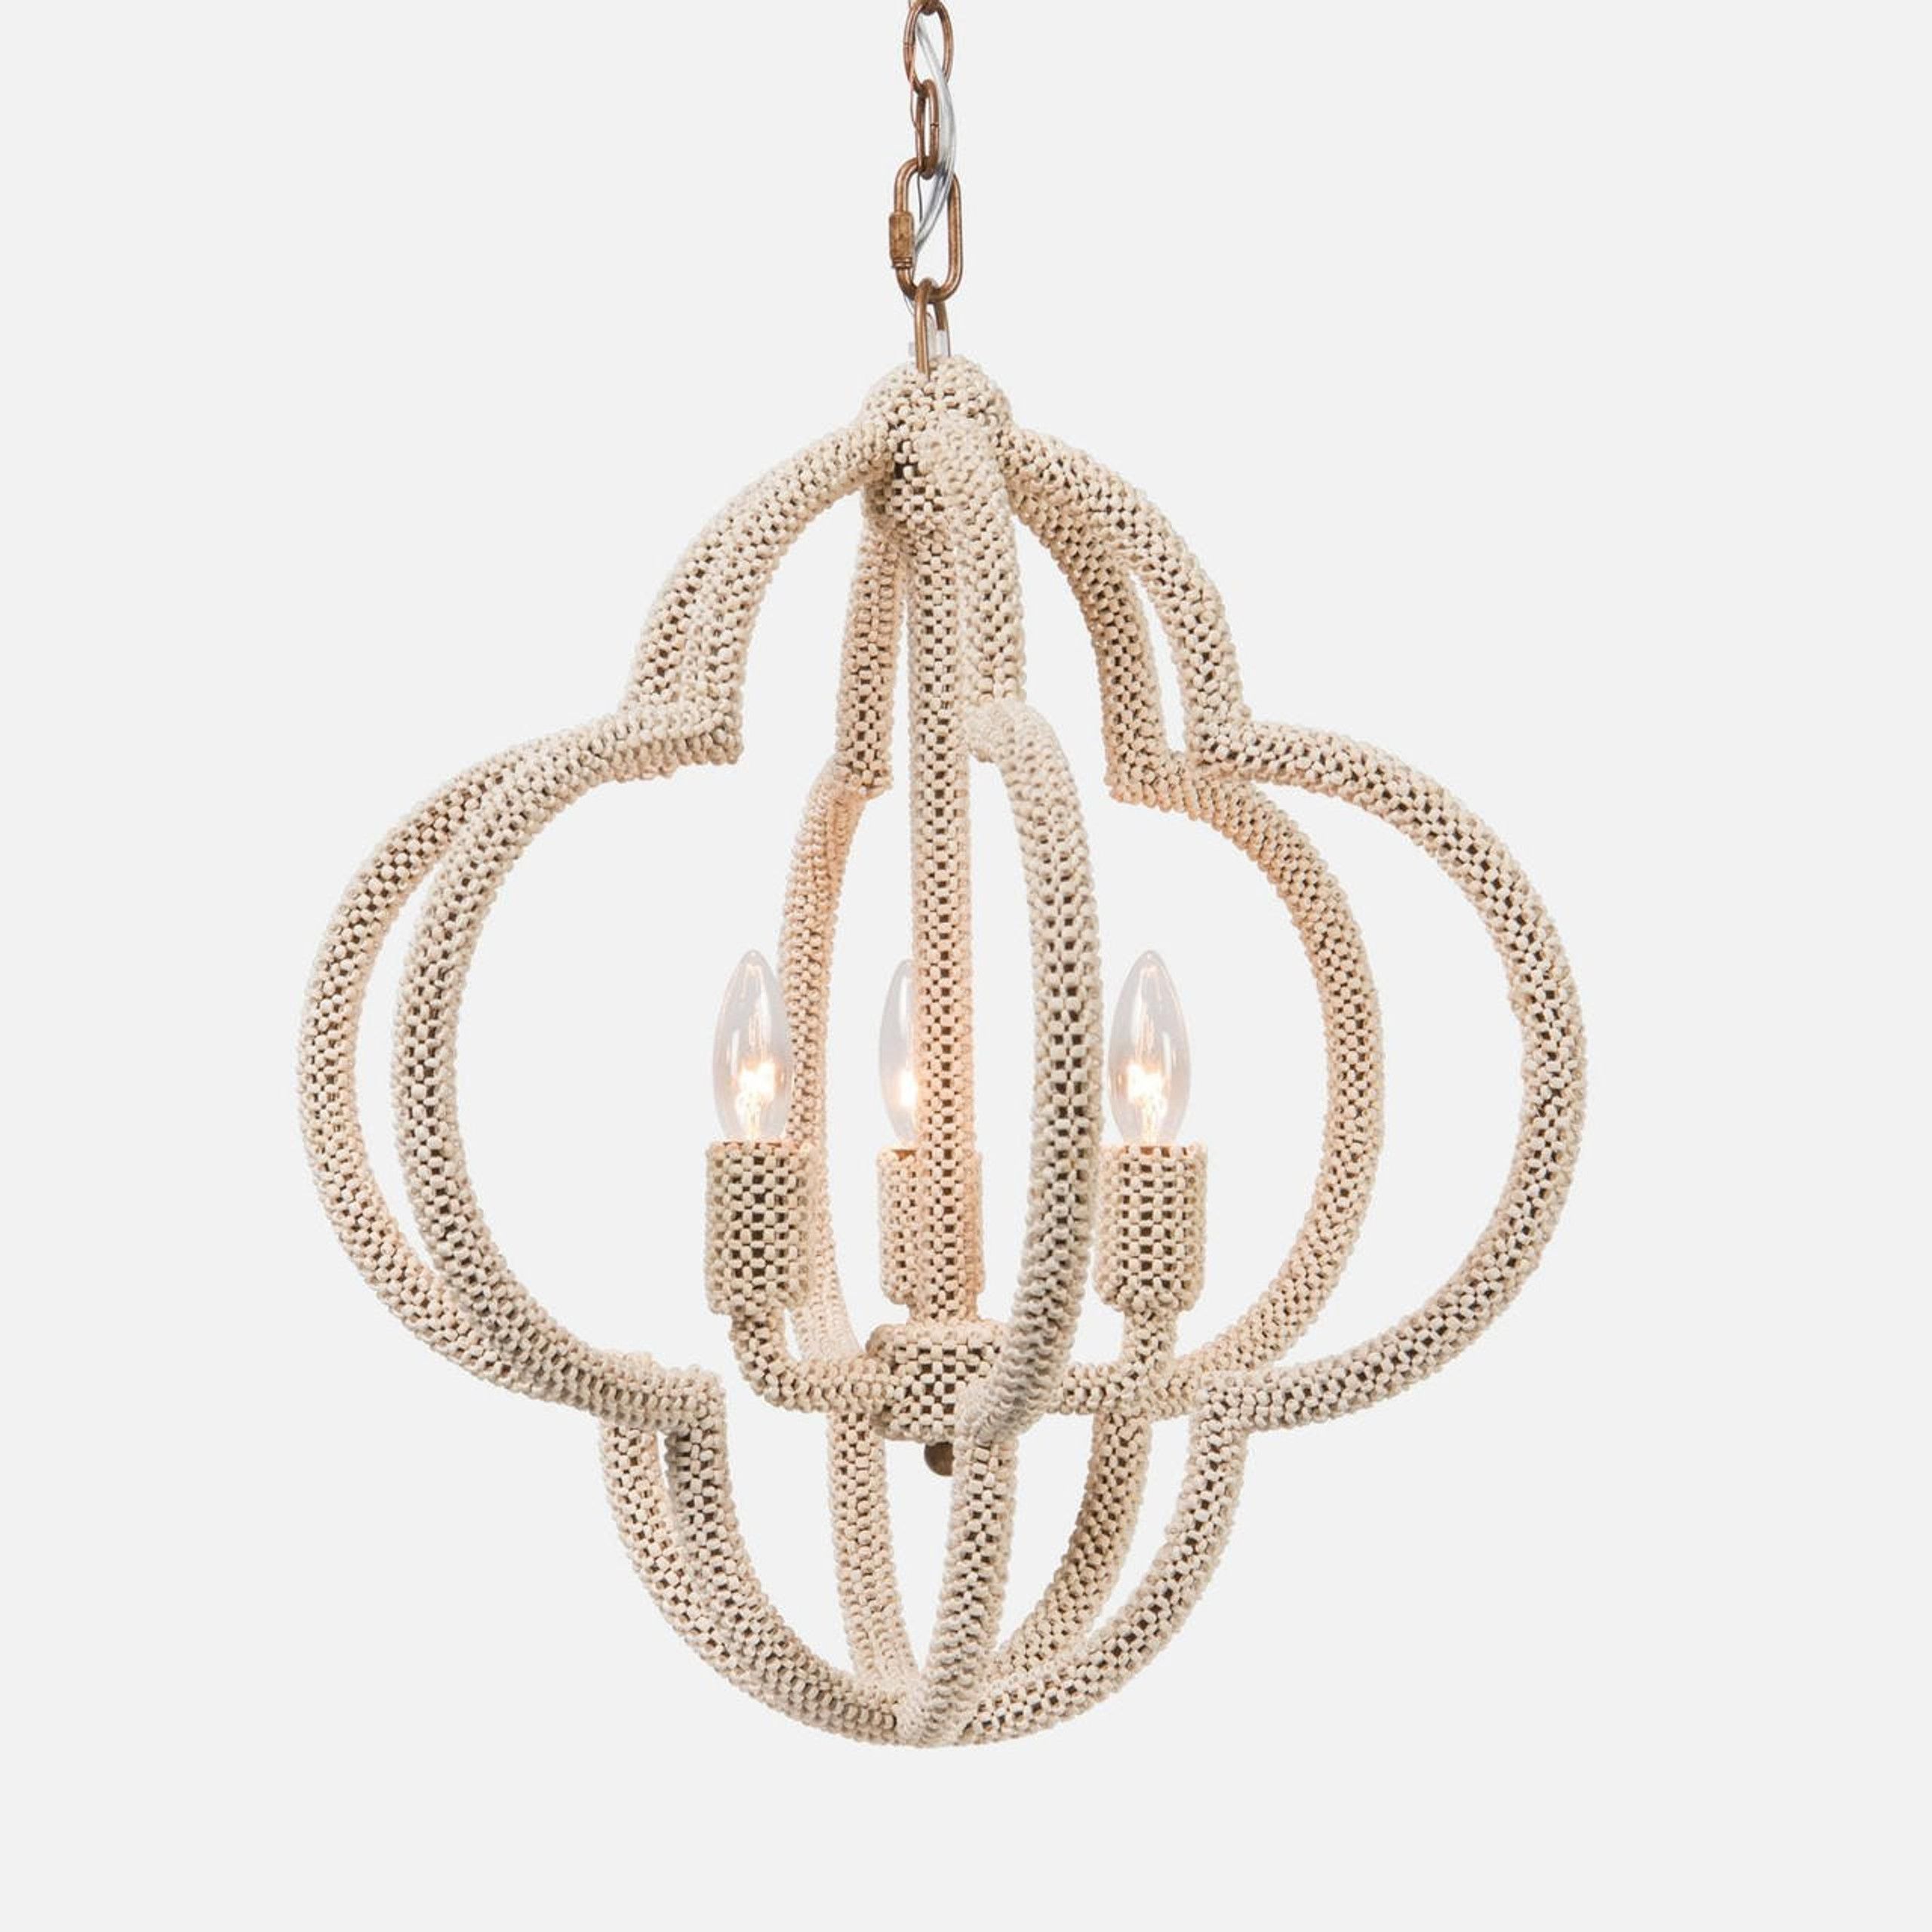 Astin Handwoven Natural Coco Beads Metal Flower Chandelier
                    
    
        
   ... | Belle and June